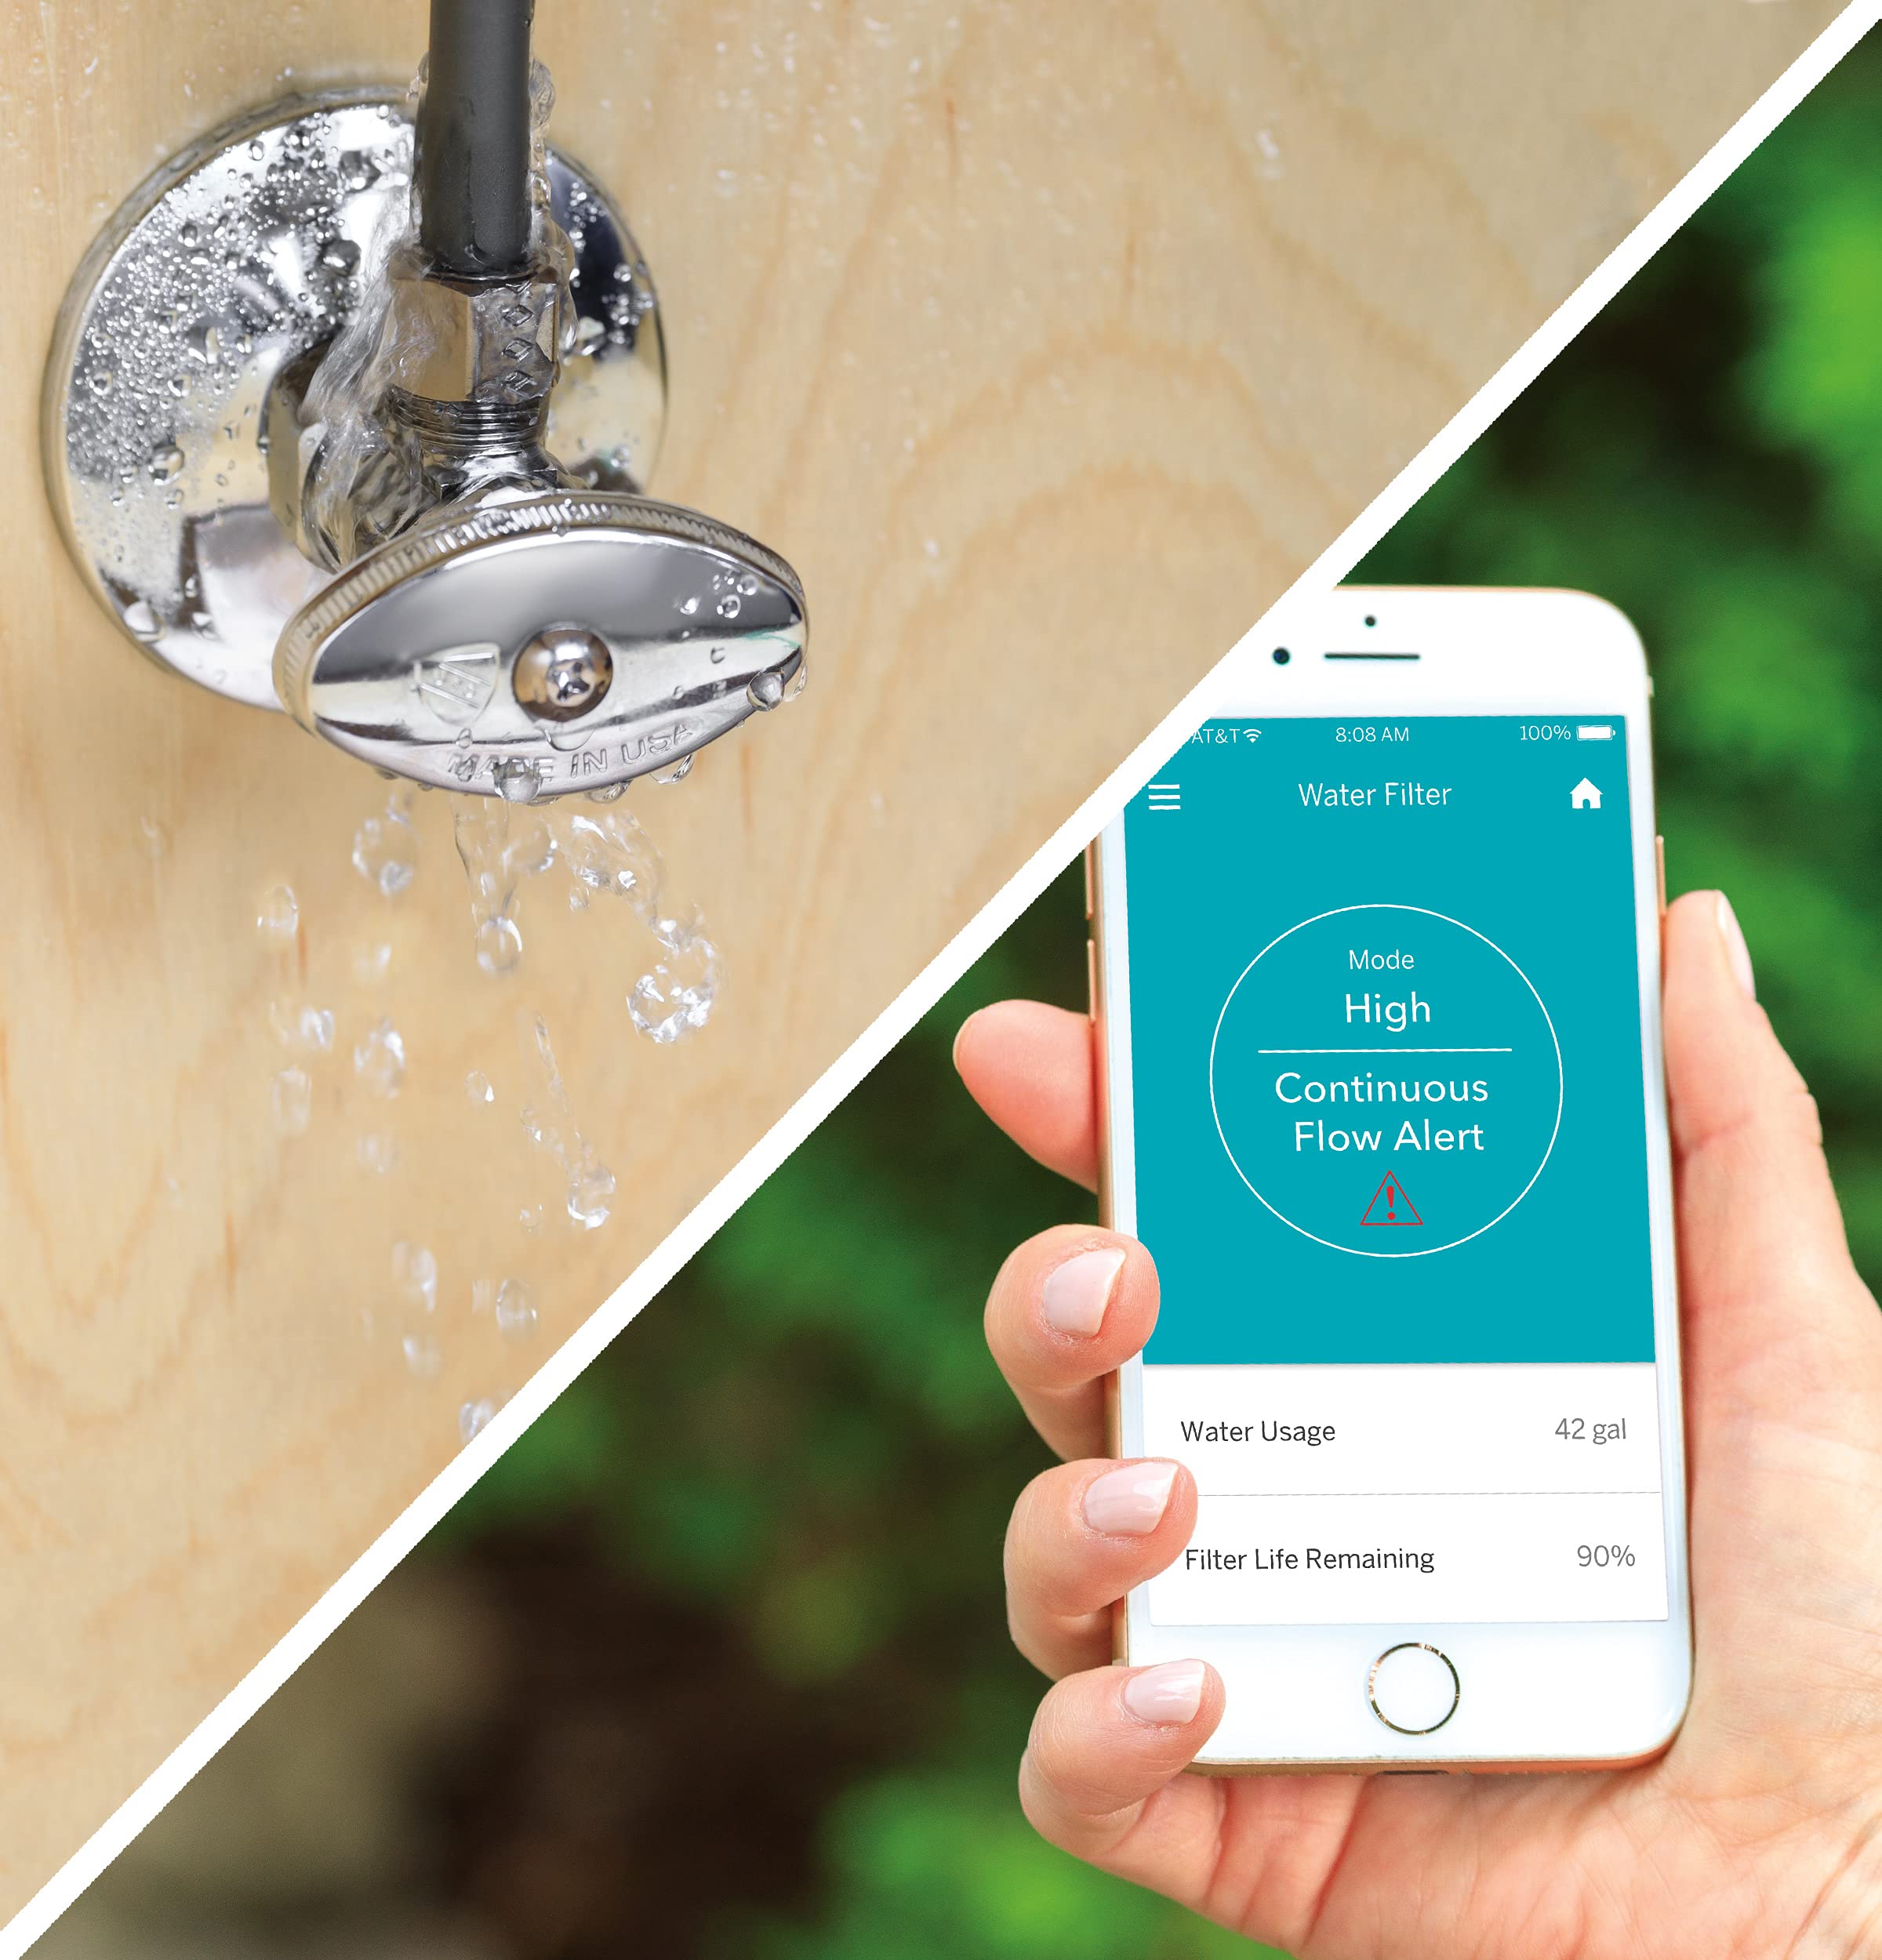 GE Smart Home Water Filter System + Premium Replacement Filter (FTHLM) | Water Filtration System Reduces Lead, Odor & More | WiFi Enabled | Three-Month Filter Life